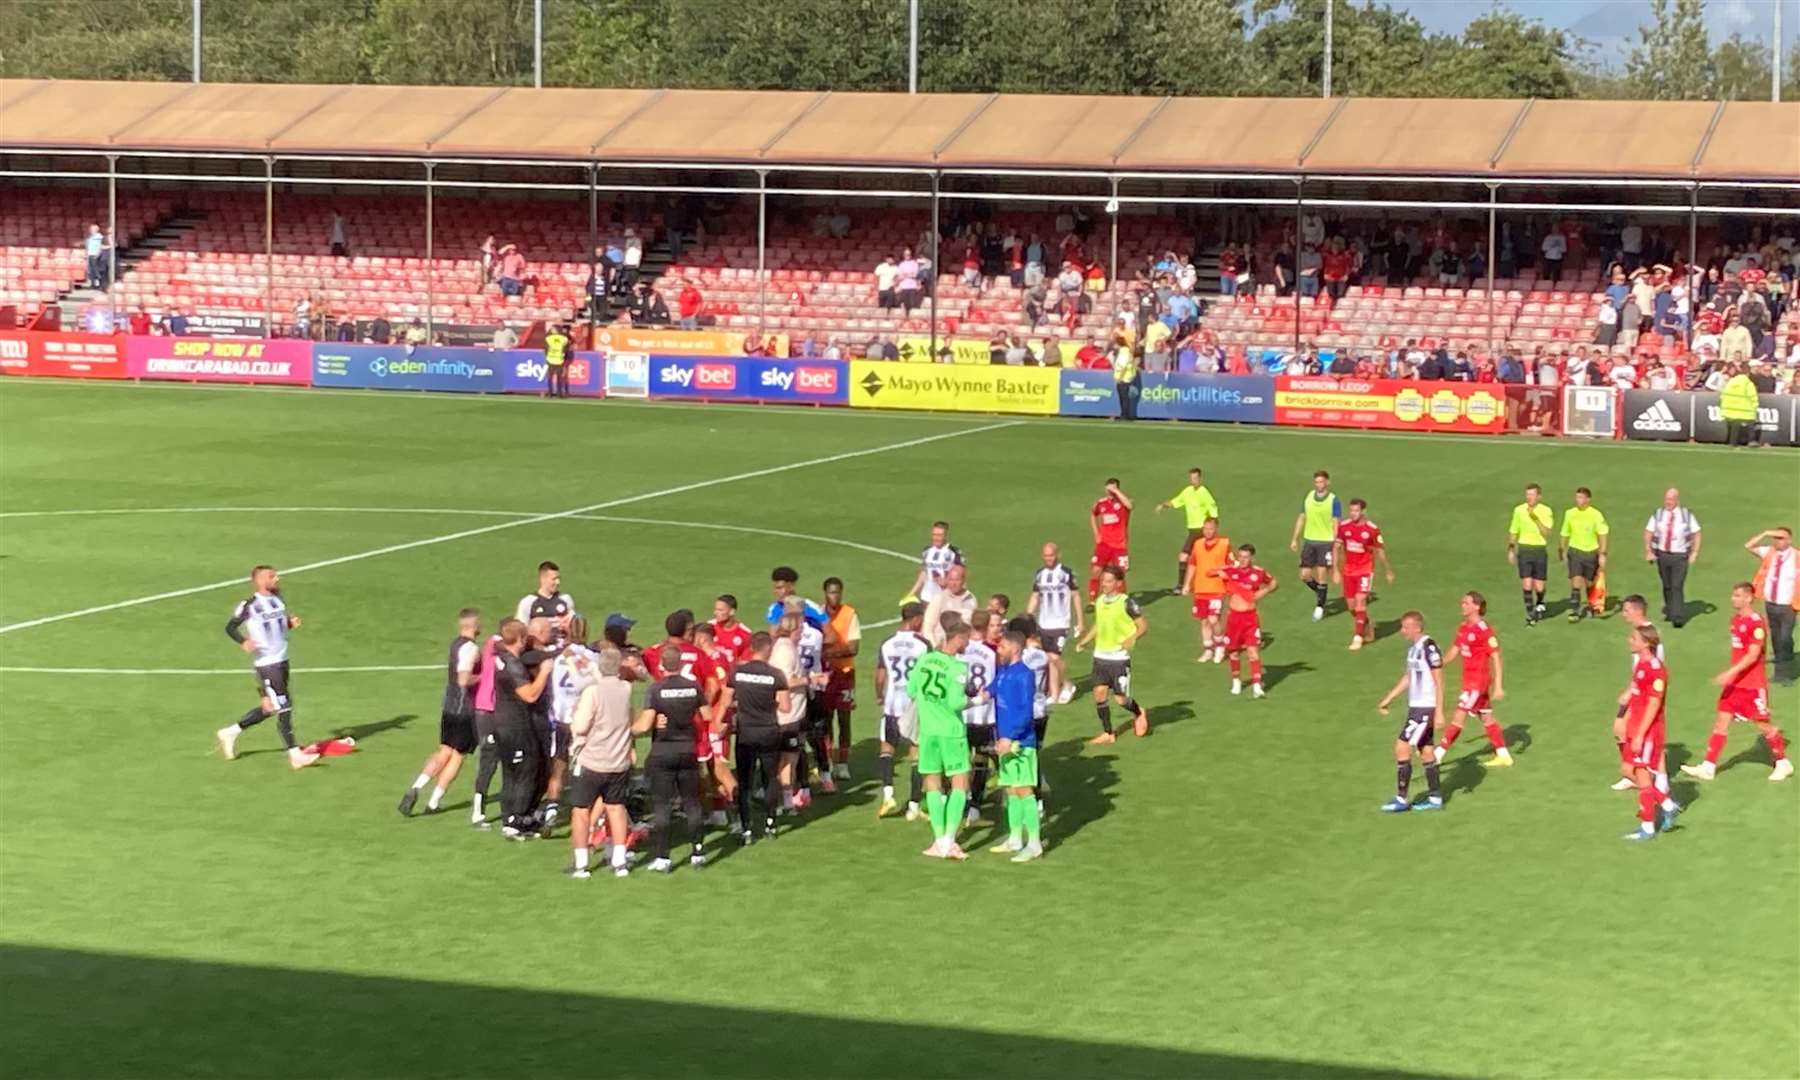 Post-match confrontation after Gillingham win 1-0 at Crawley